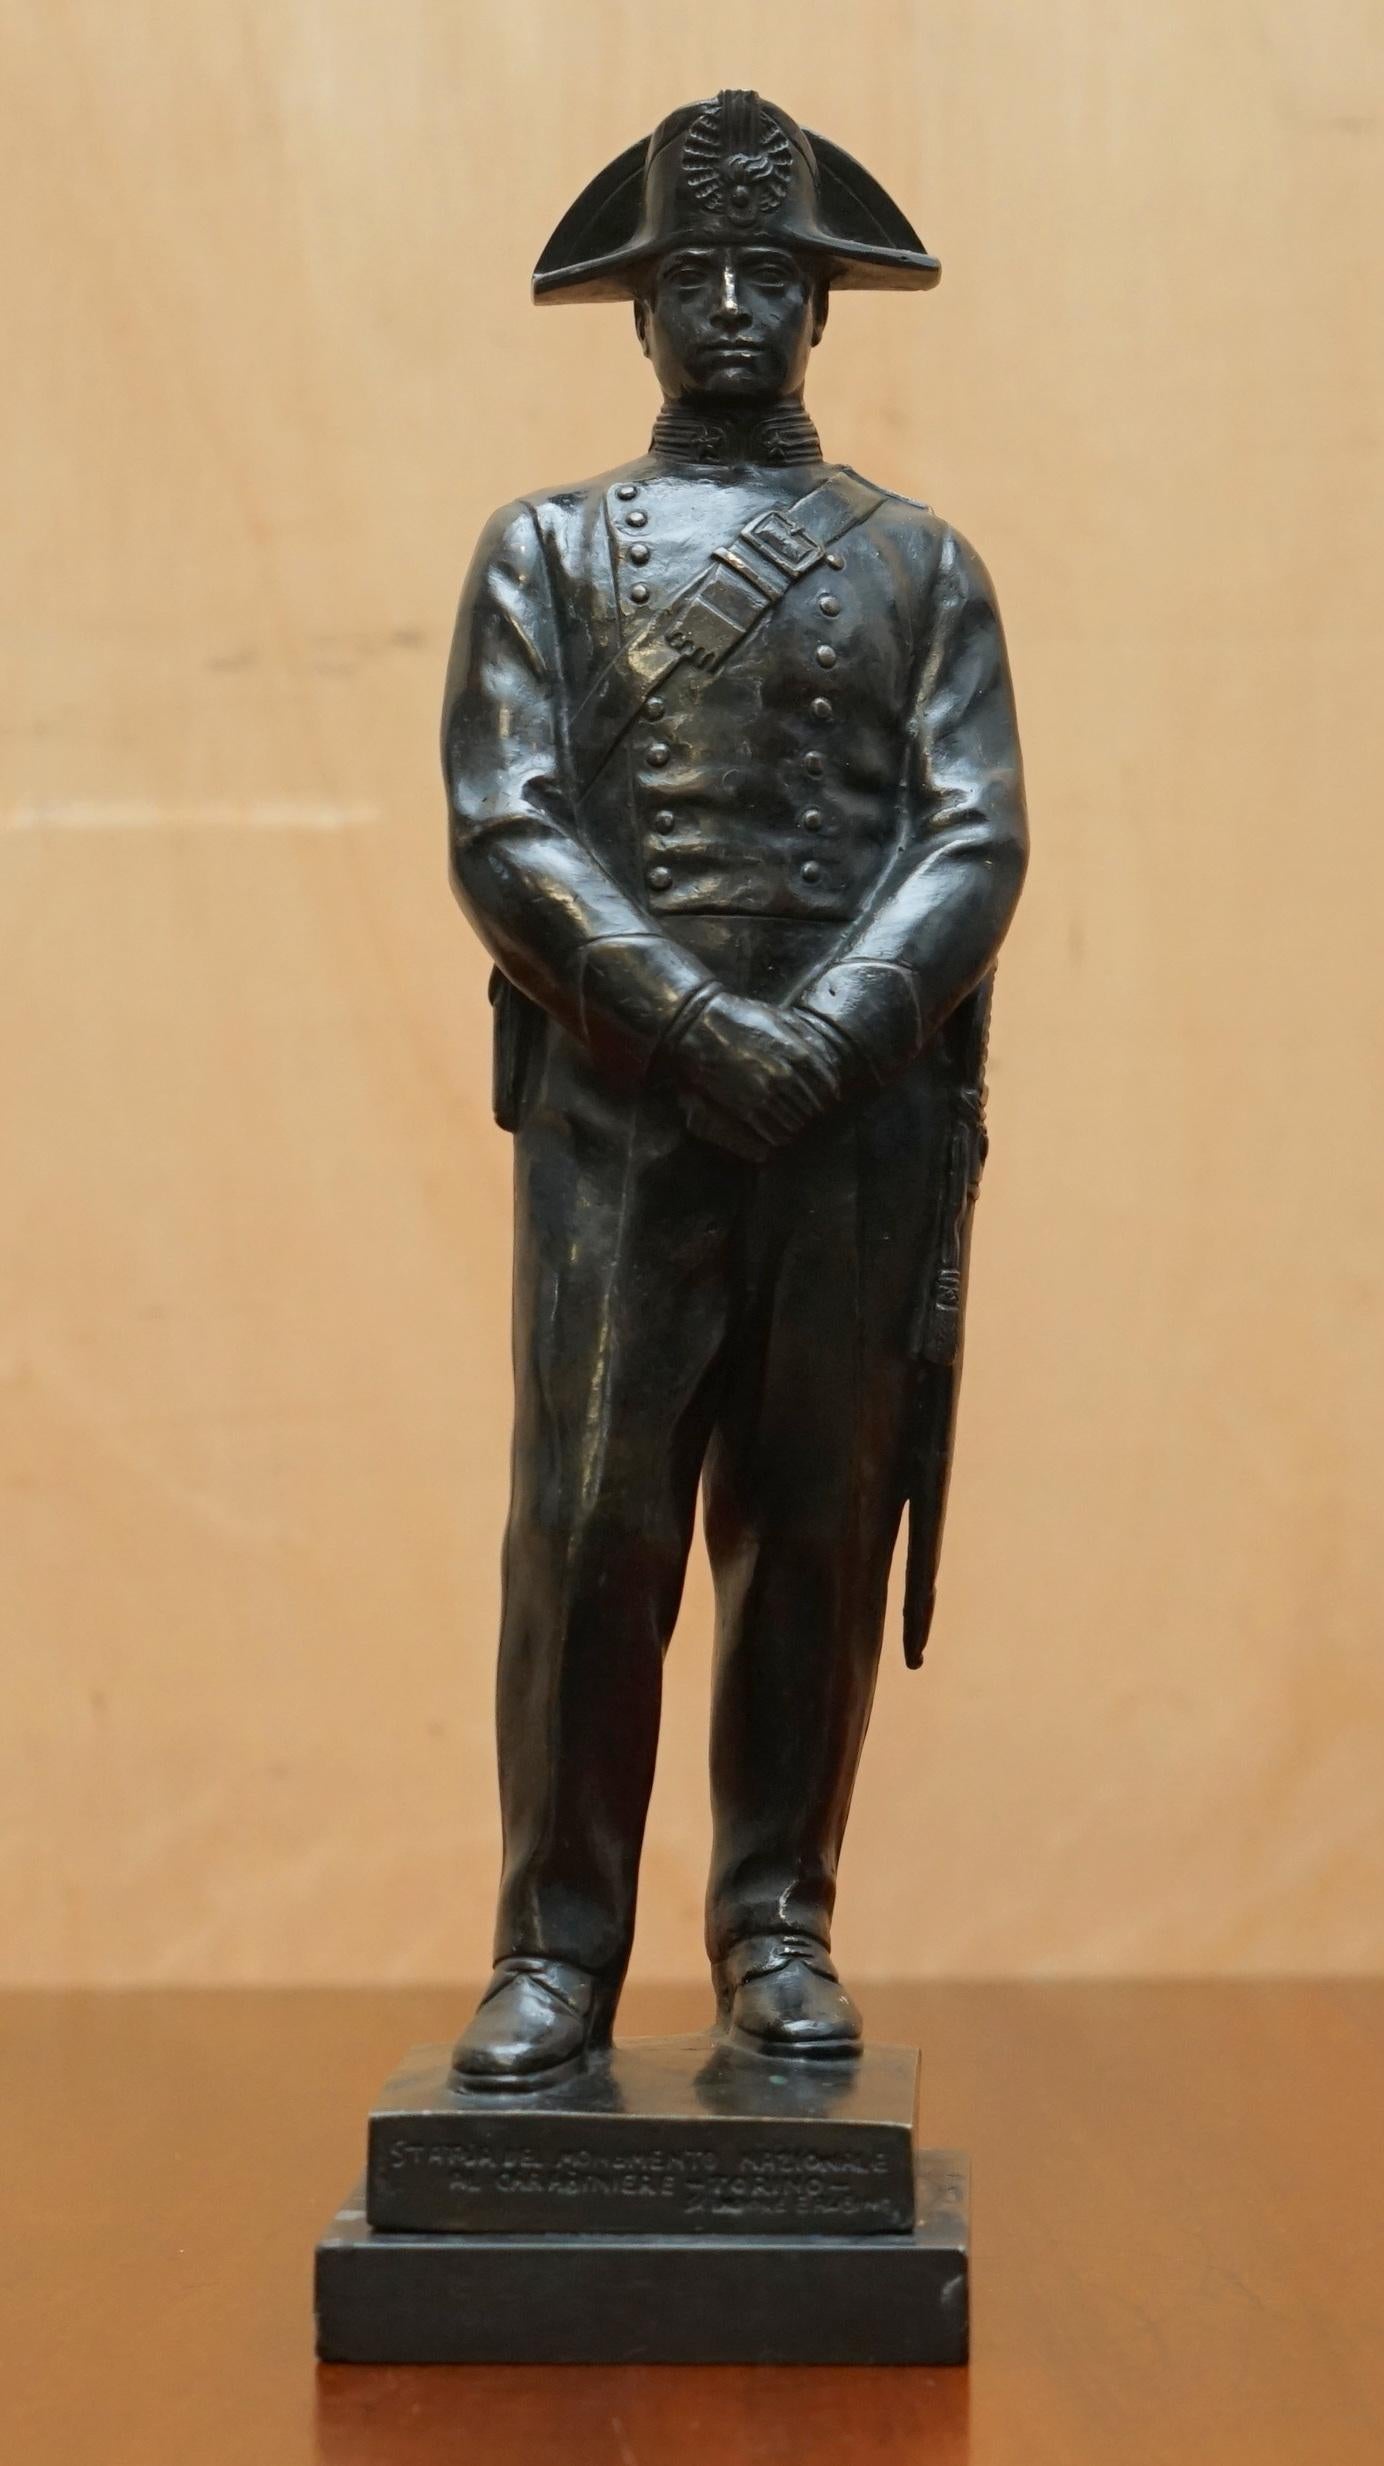 Royal House Antiques

Royal House Antiques is delighted to offer for sale this stunning original antique bronze statue by Edoardo Rubino of a Torino Carabiniere officer in full dress seated in a marble base

This is an original example not later